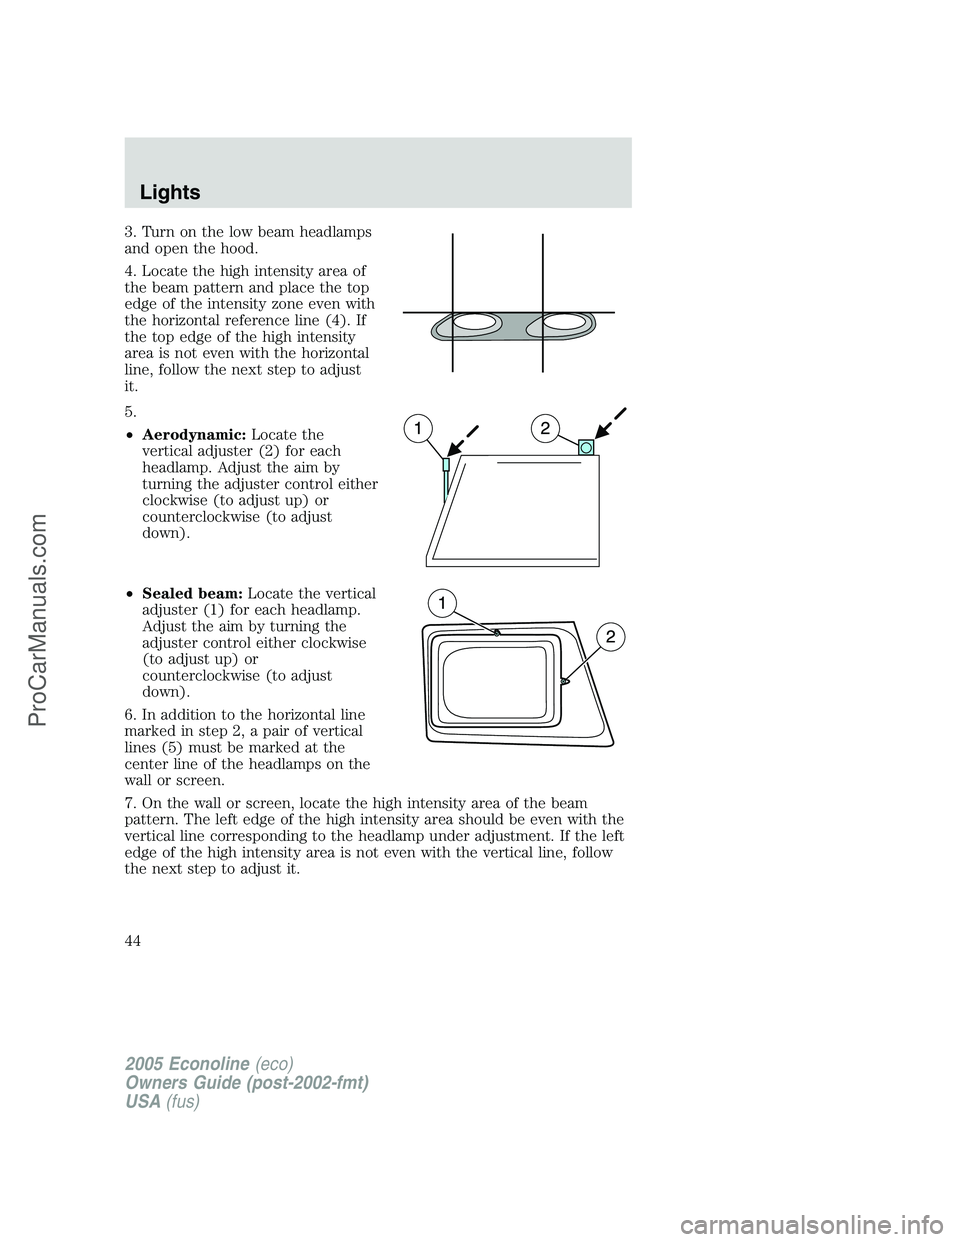 FORD E-150 2005  Owners Manual 3. Turn on the low beam headlamps
and open the hood.
4. Locate the high intensity area of
the beam pattern and place the top
edge of the intensity zone even with
the horizontal reference line (4). If
